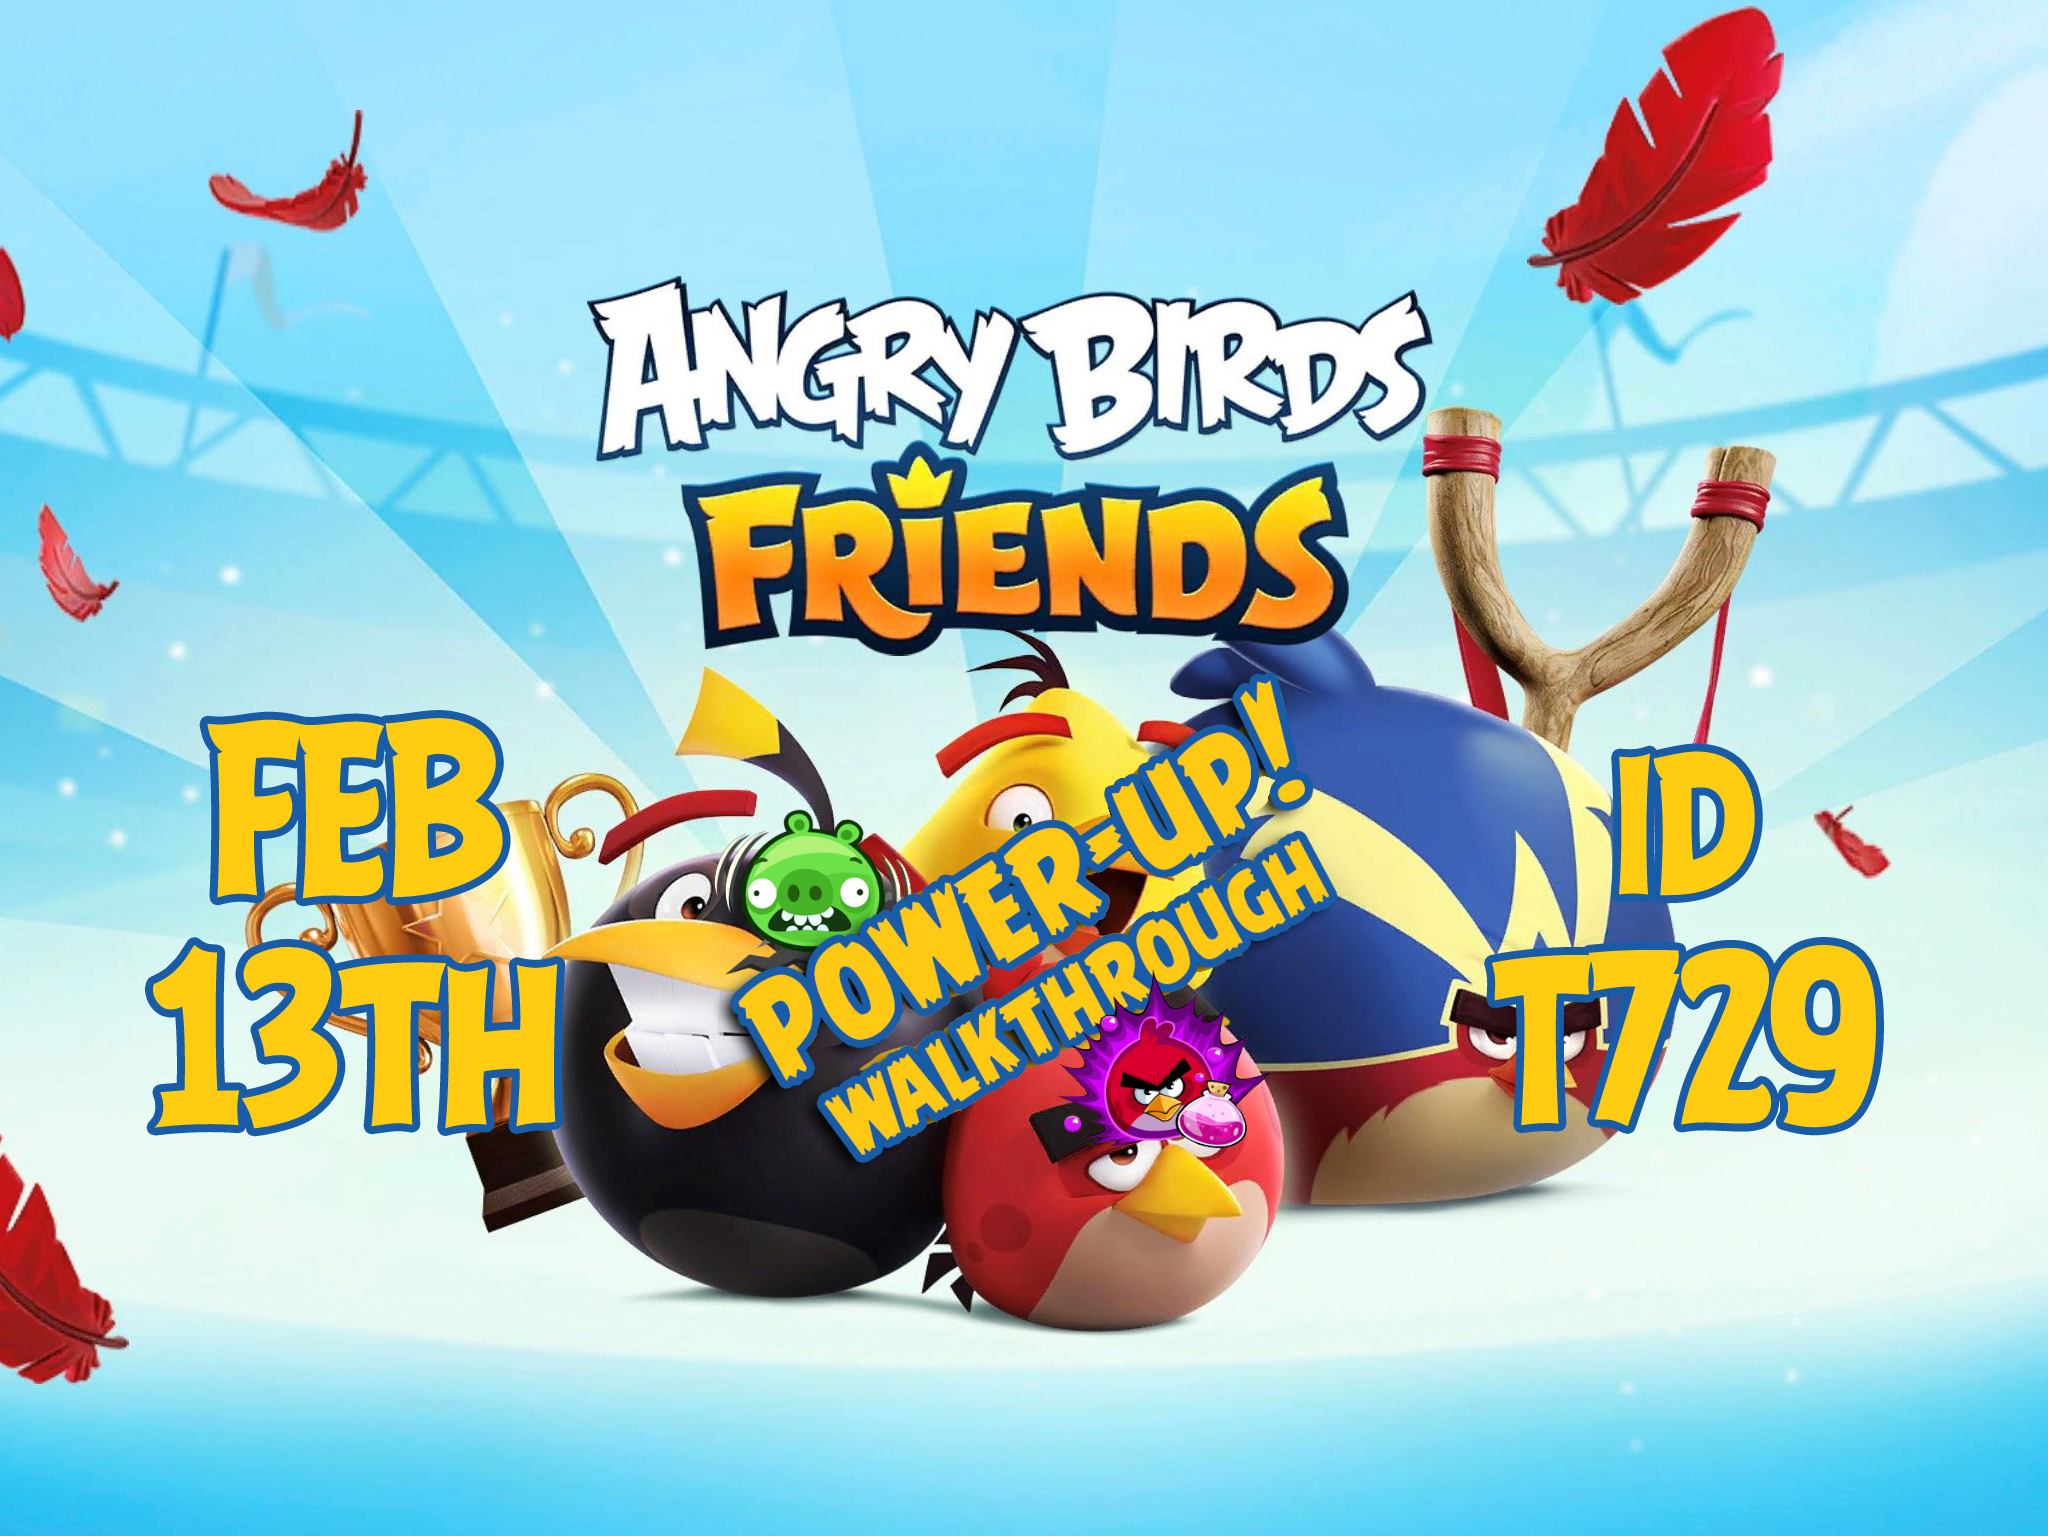 Angry-Birds-Friends-Tournament-T729-Feature-Image-PU